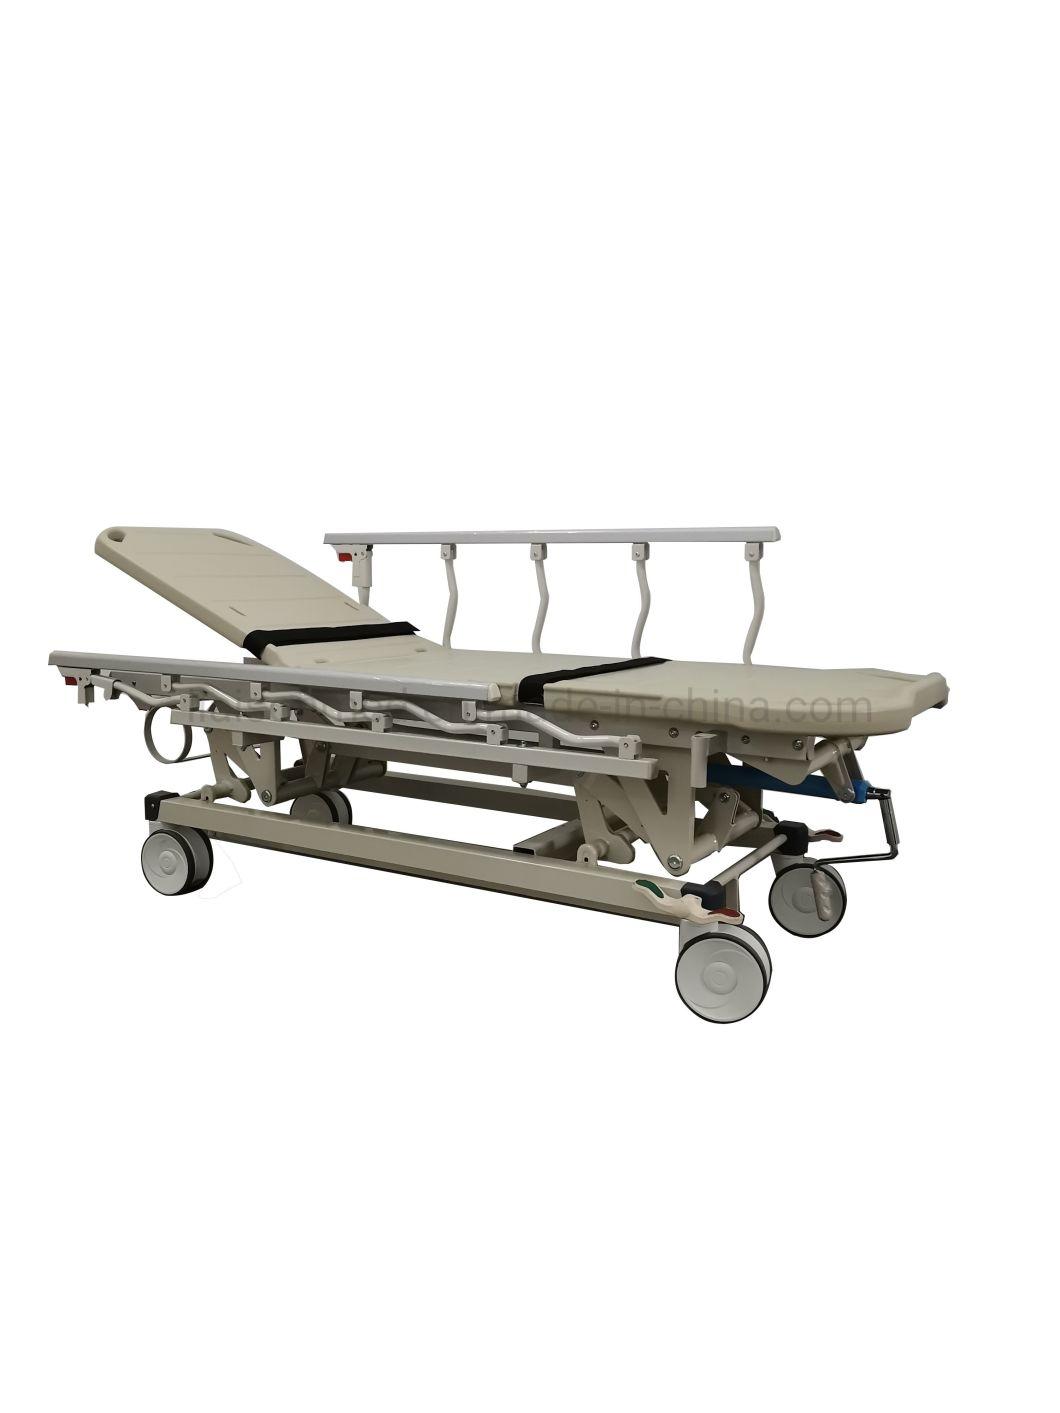 Blue Two Liaison Wooden Package 1930mm*663mm*510— 850mm Emergency Bed Stretcher